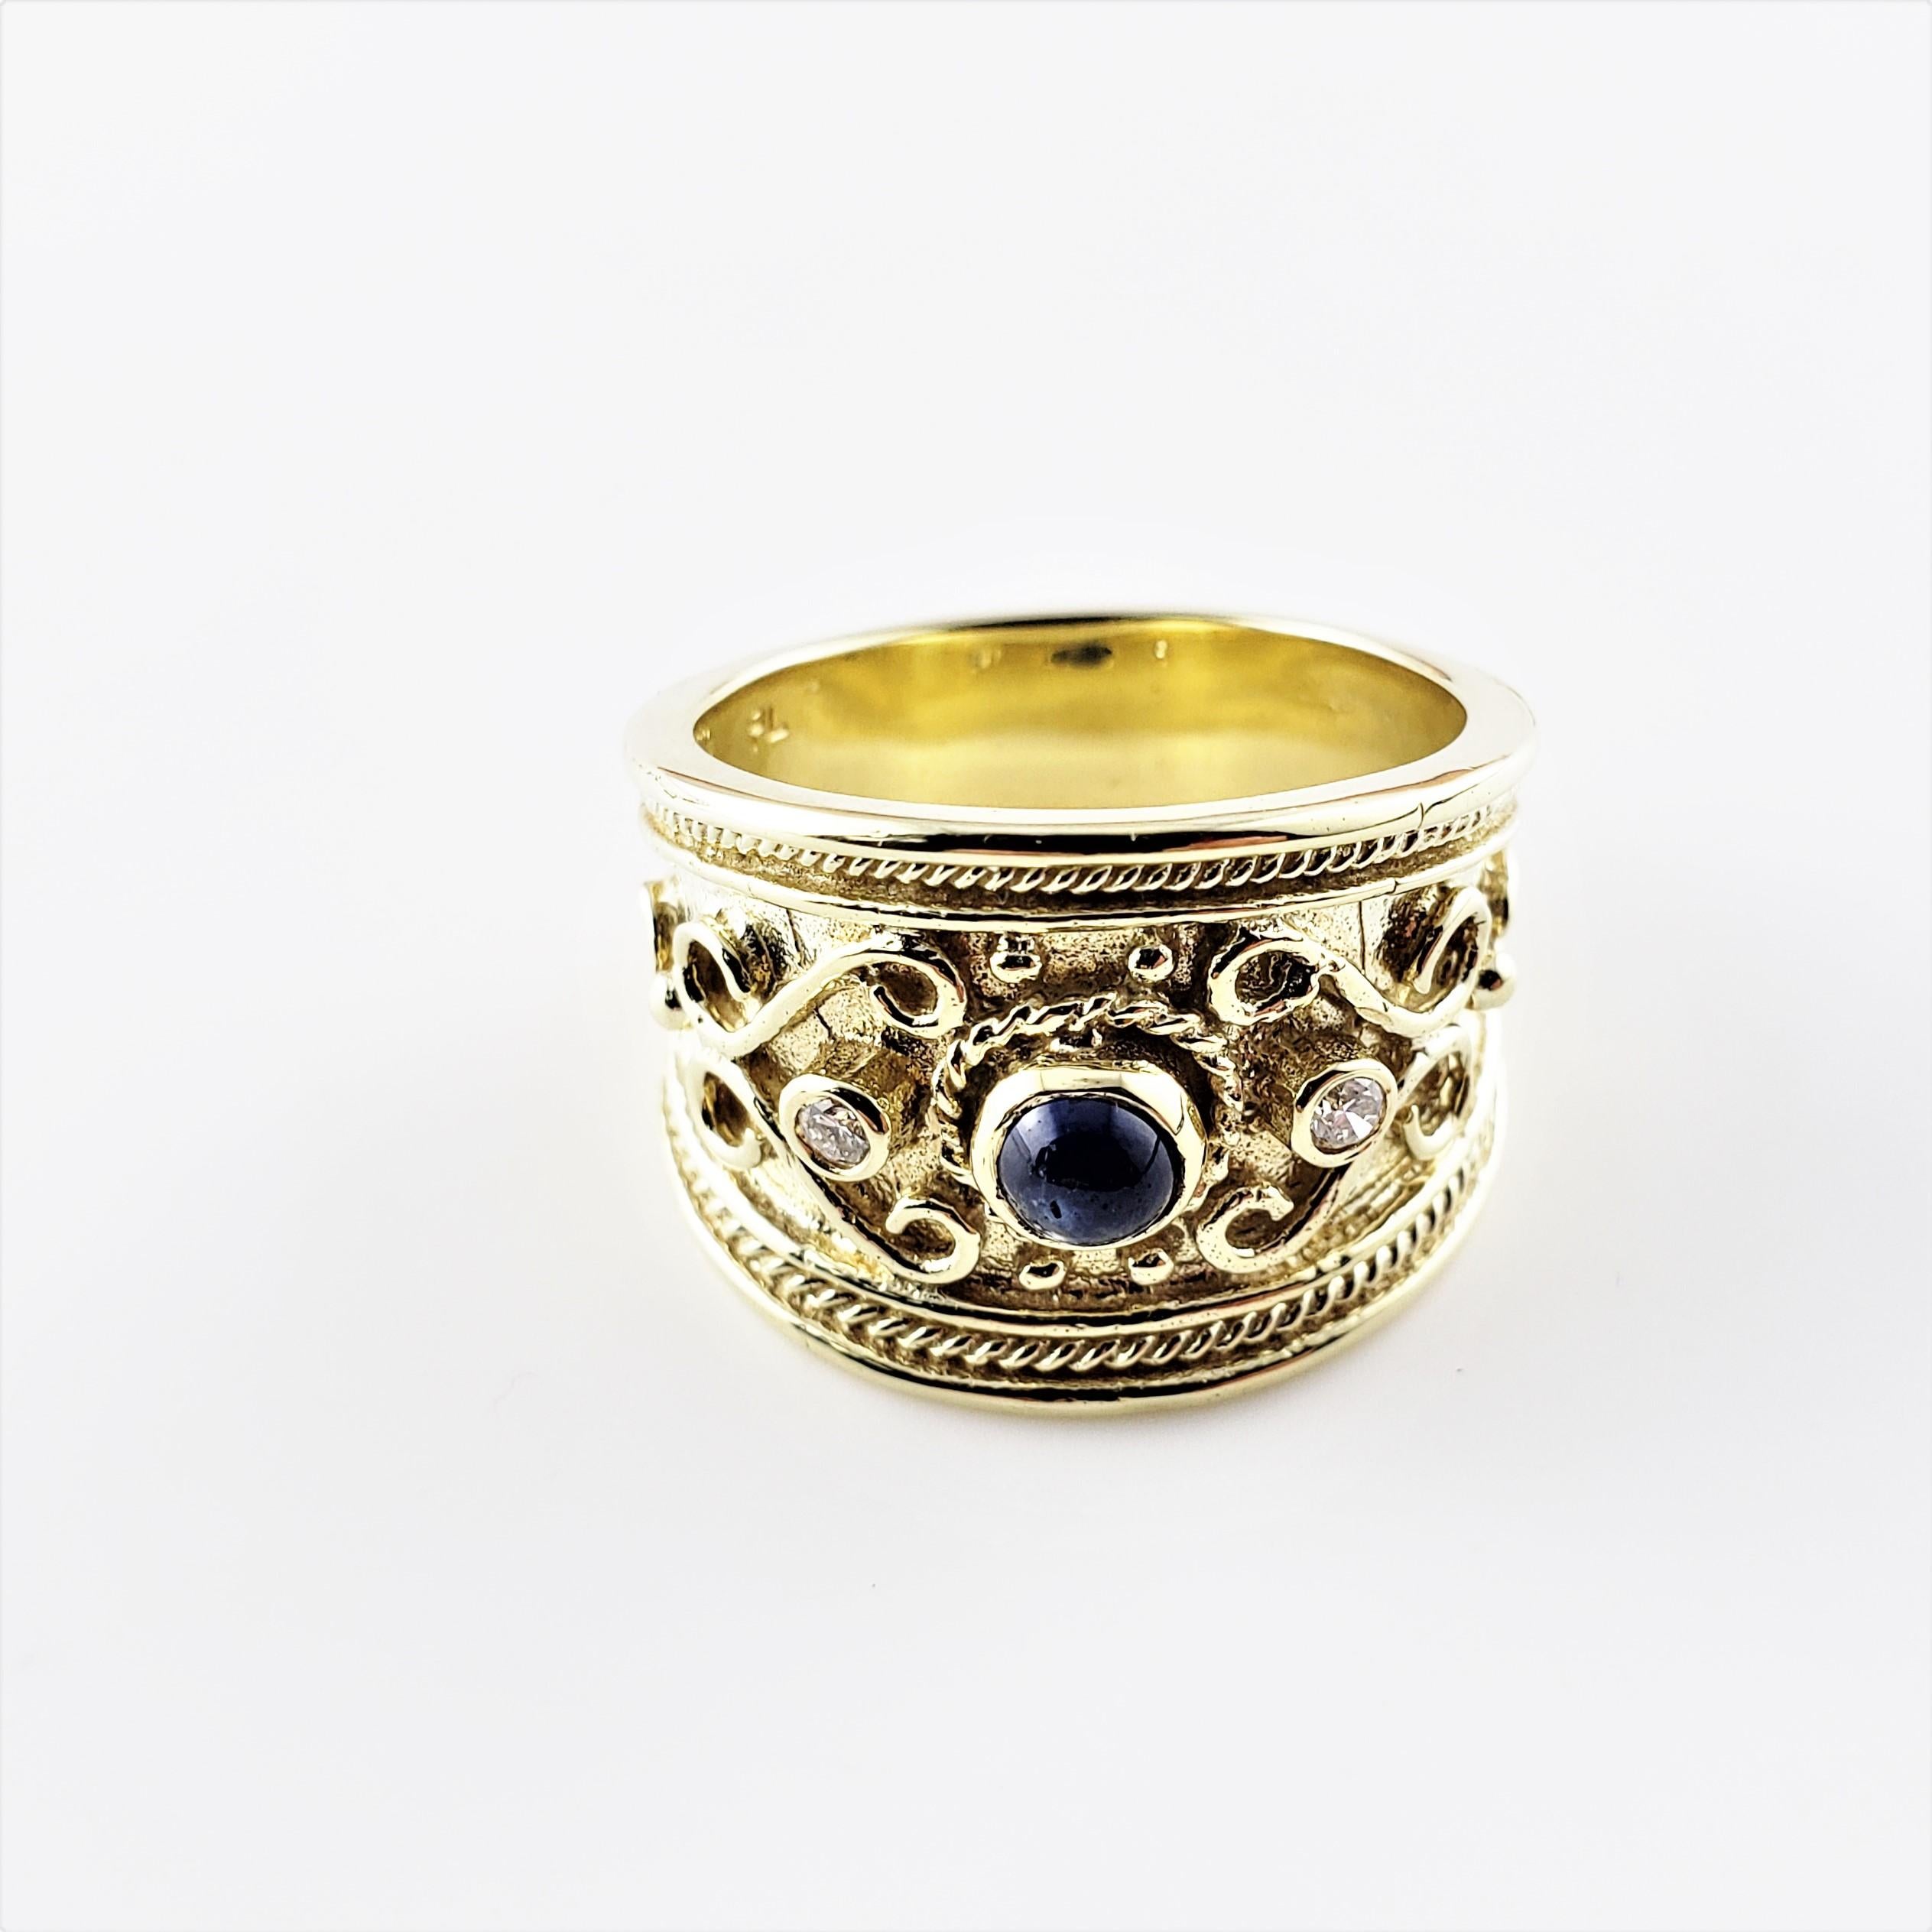 Vintage 14 Karat Yellow Gold Cabochon Sapphire and Diamond Band Ring Size 6.5-

This lovely band feature one cabochon sapphire (5 mm) and two round brilliant cut diamonds set in beautifully detailed 14K yellow gold. Width: 15 mm. Shank: 7